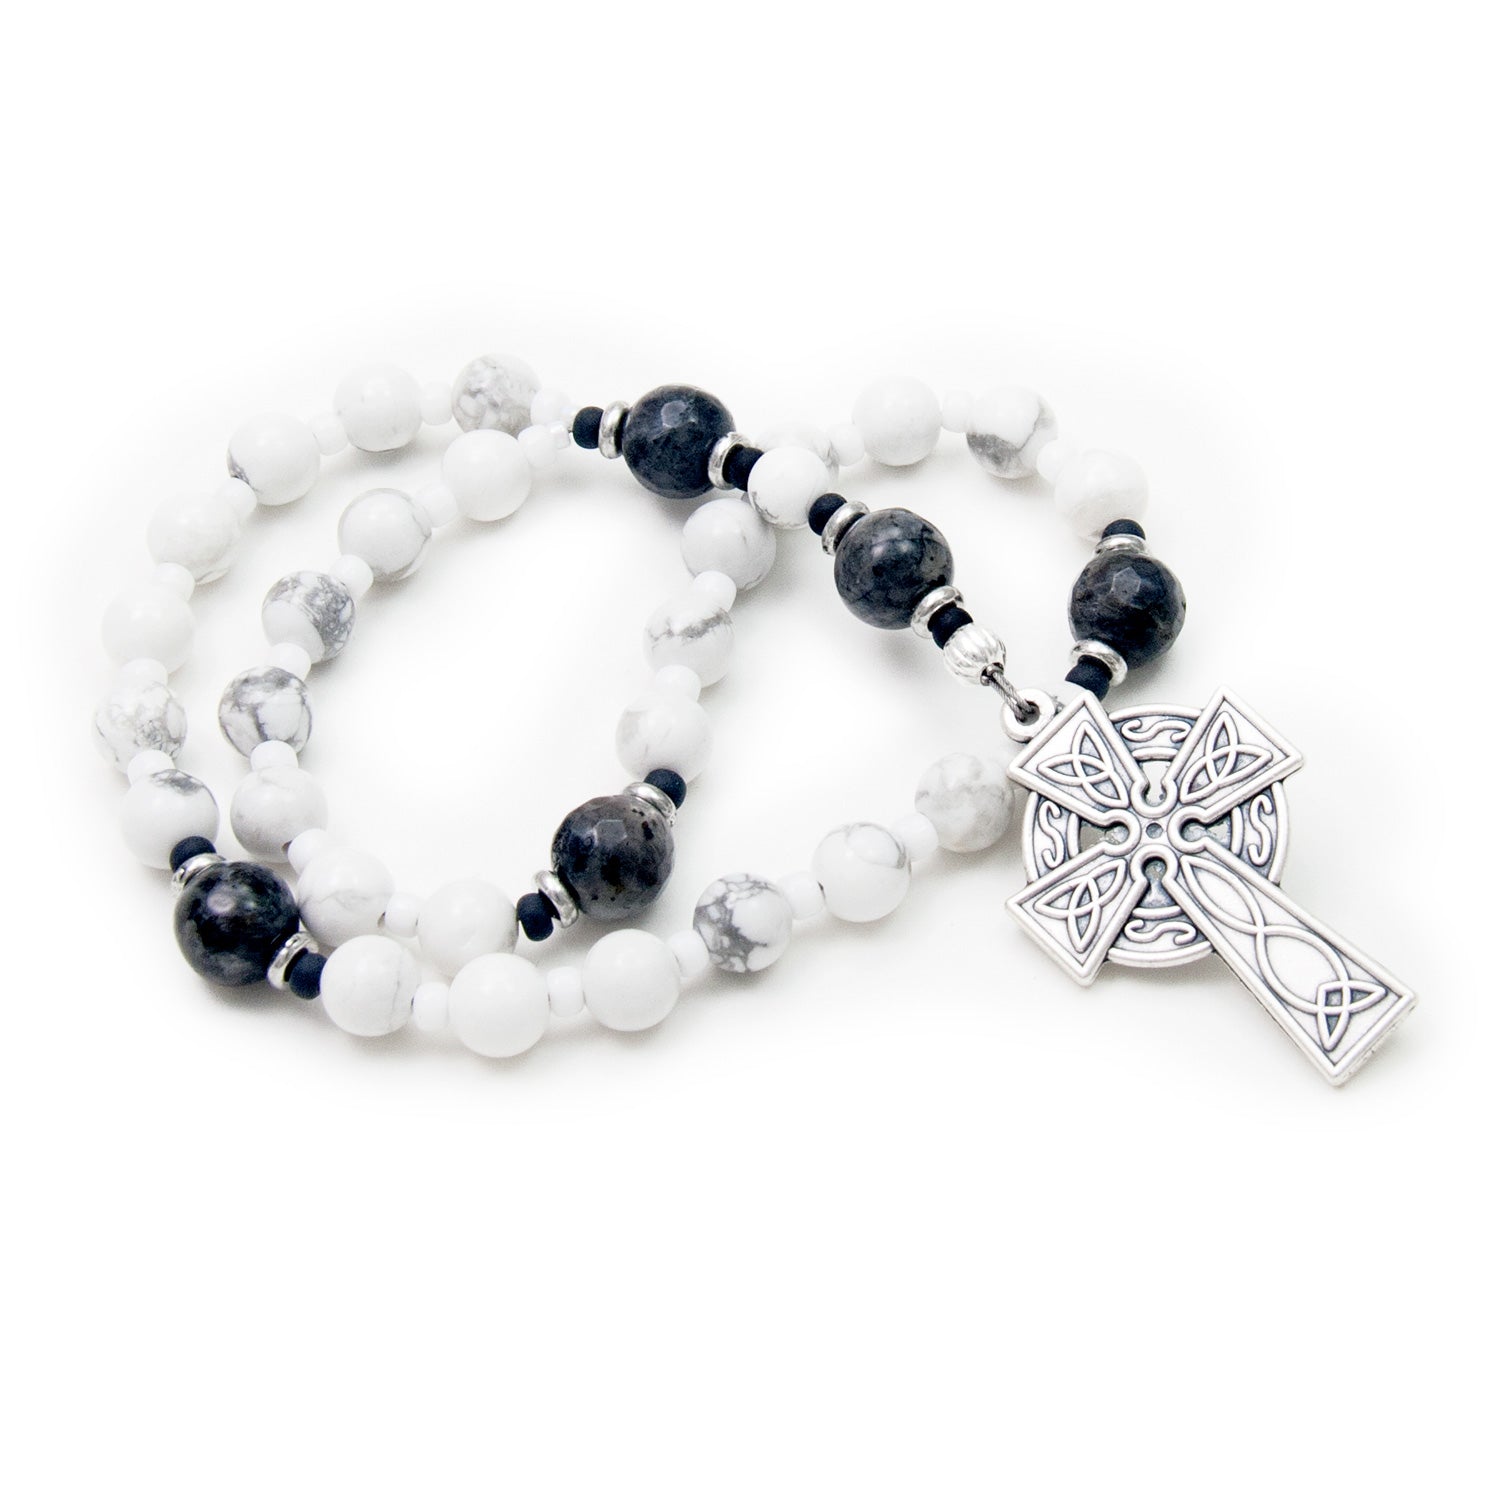 Howlite Anglican Rosary